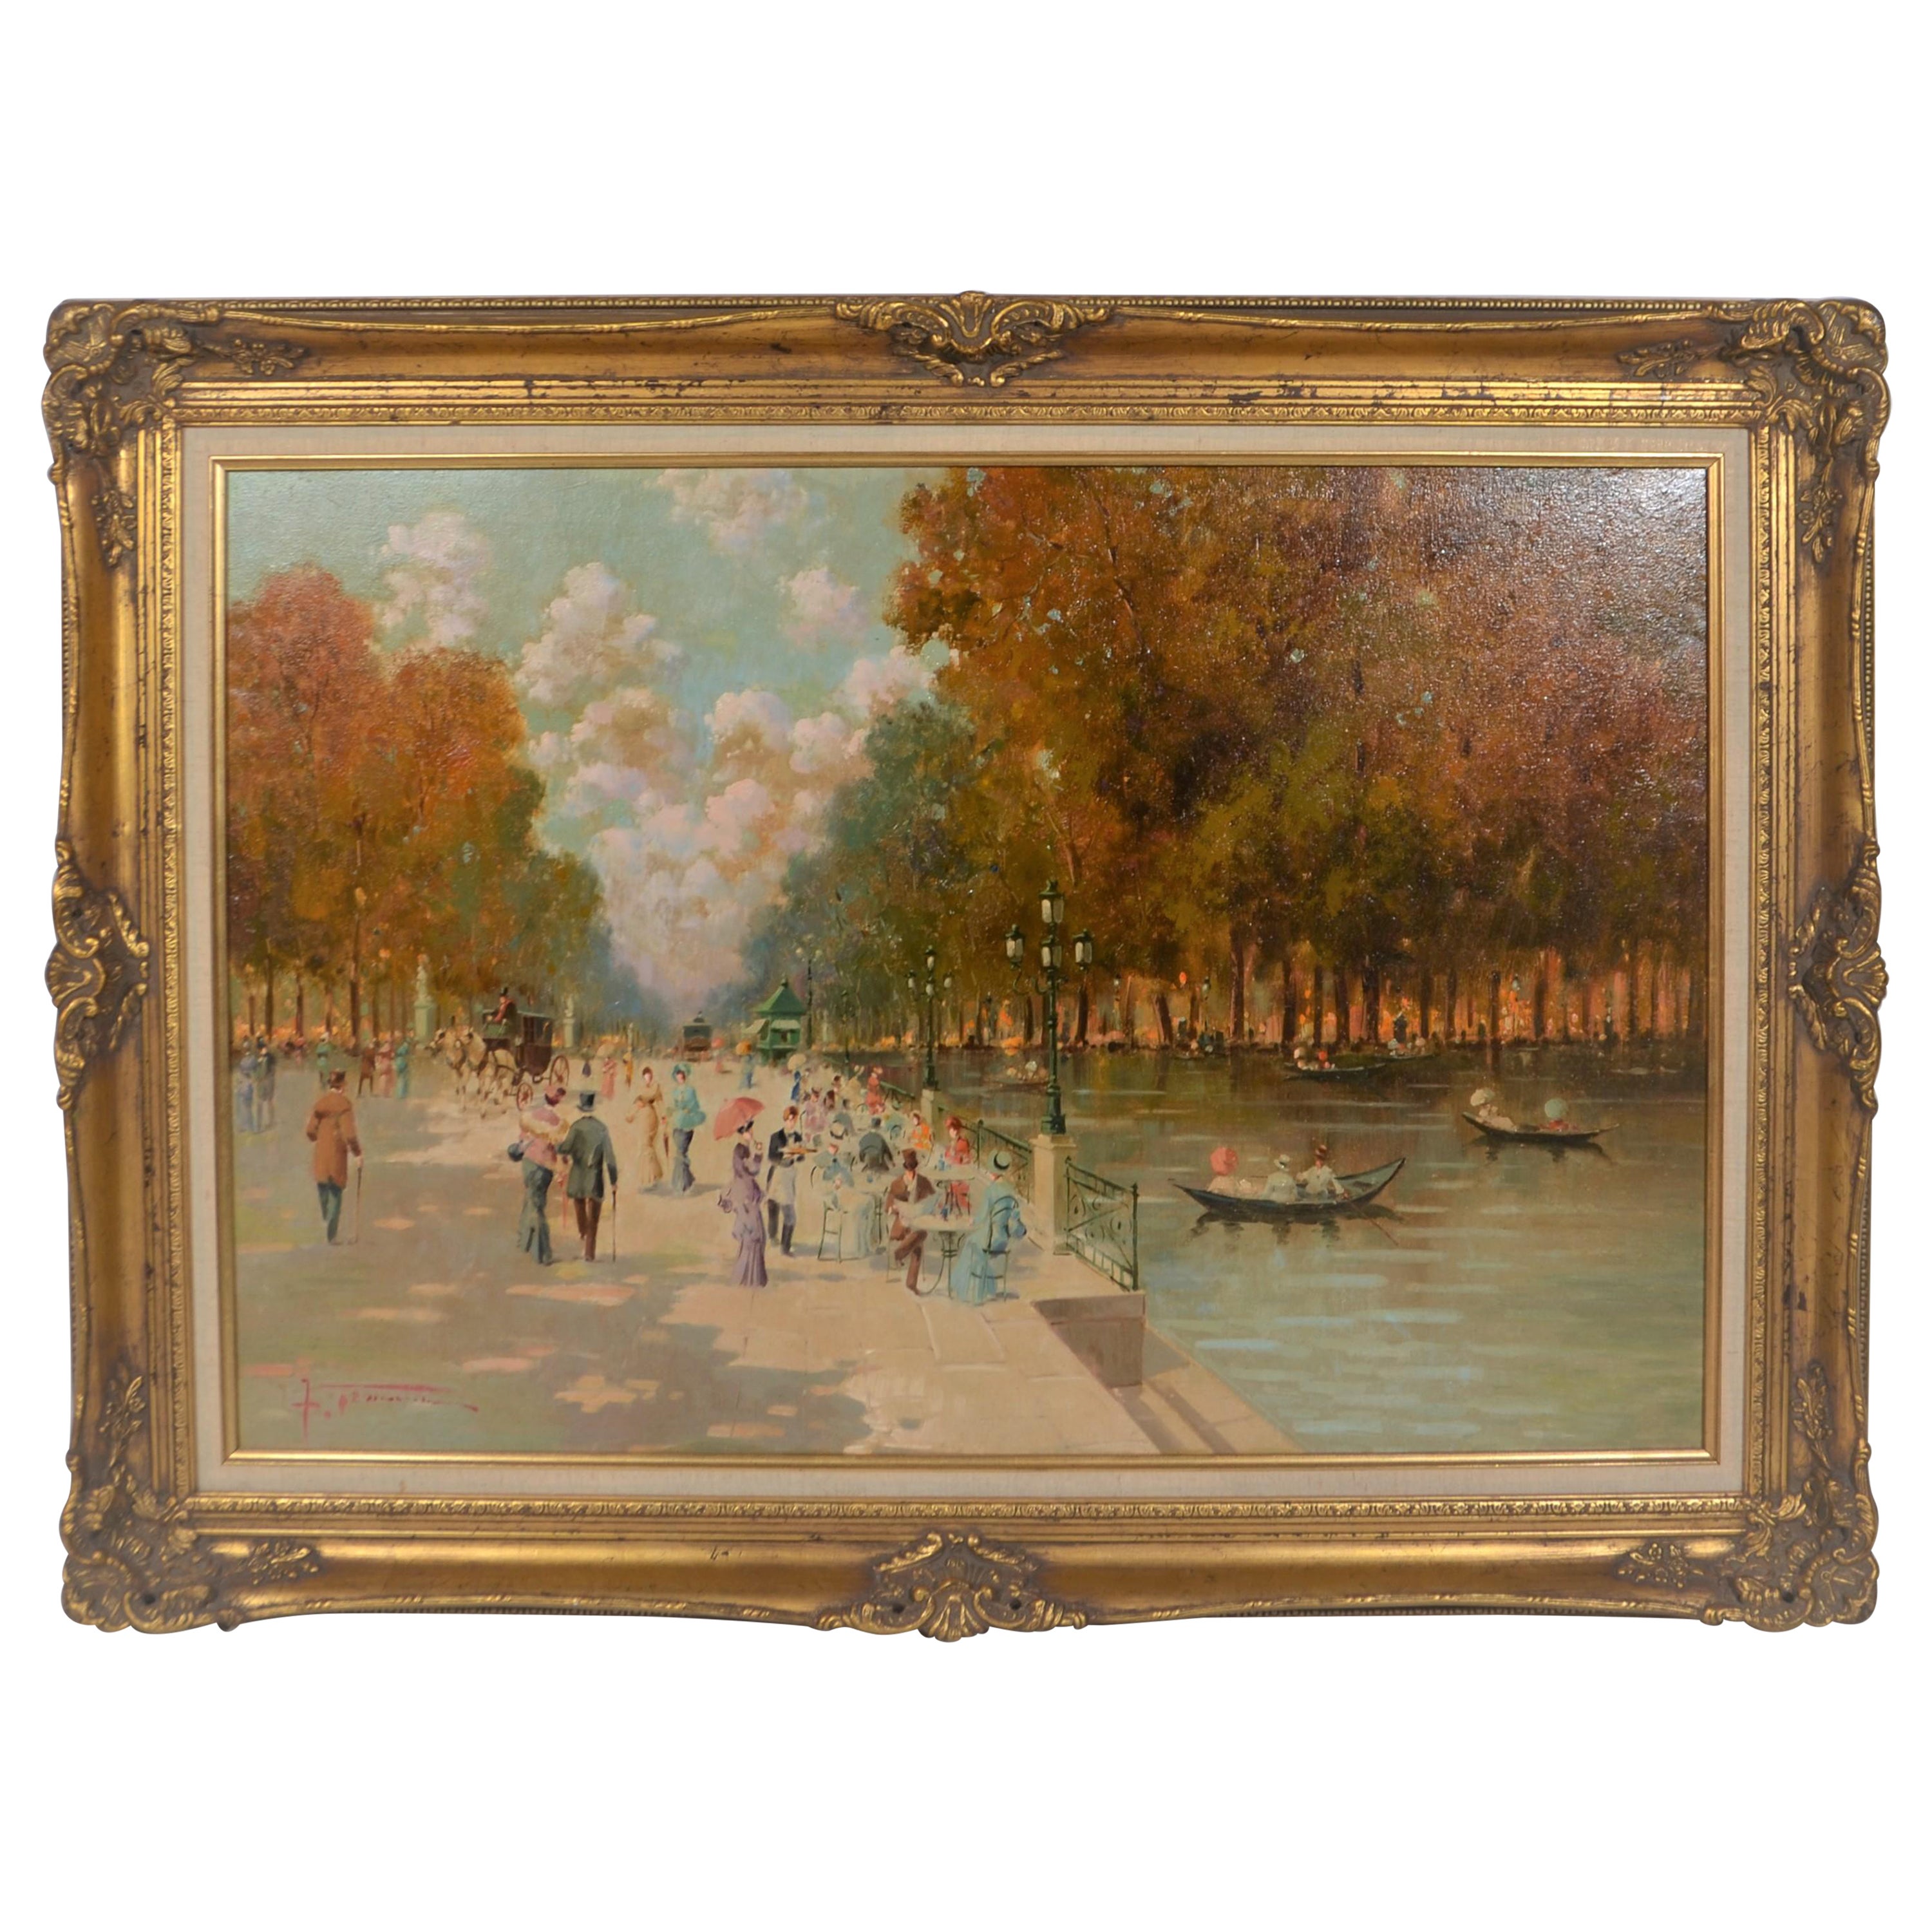 Large French Riverbank Scene Painting, Oil on Canvas, Signed